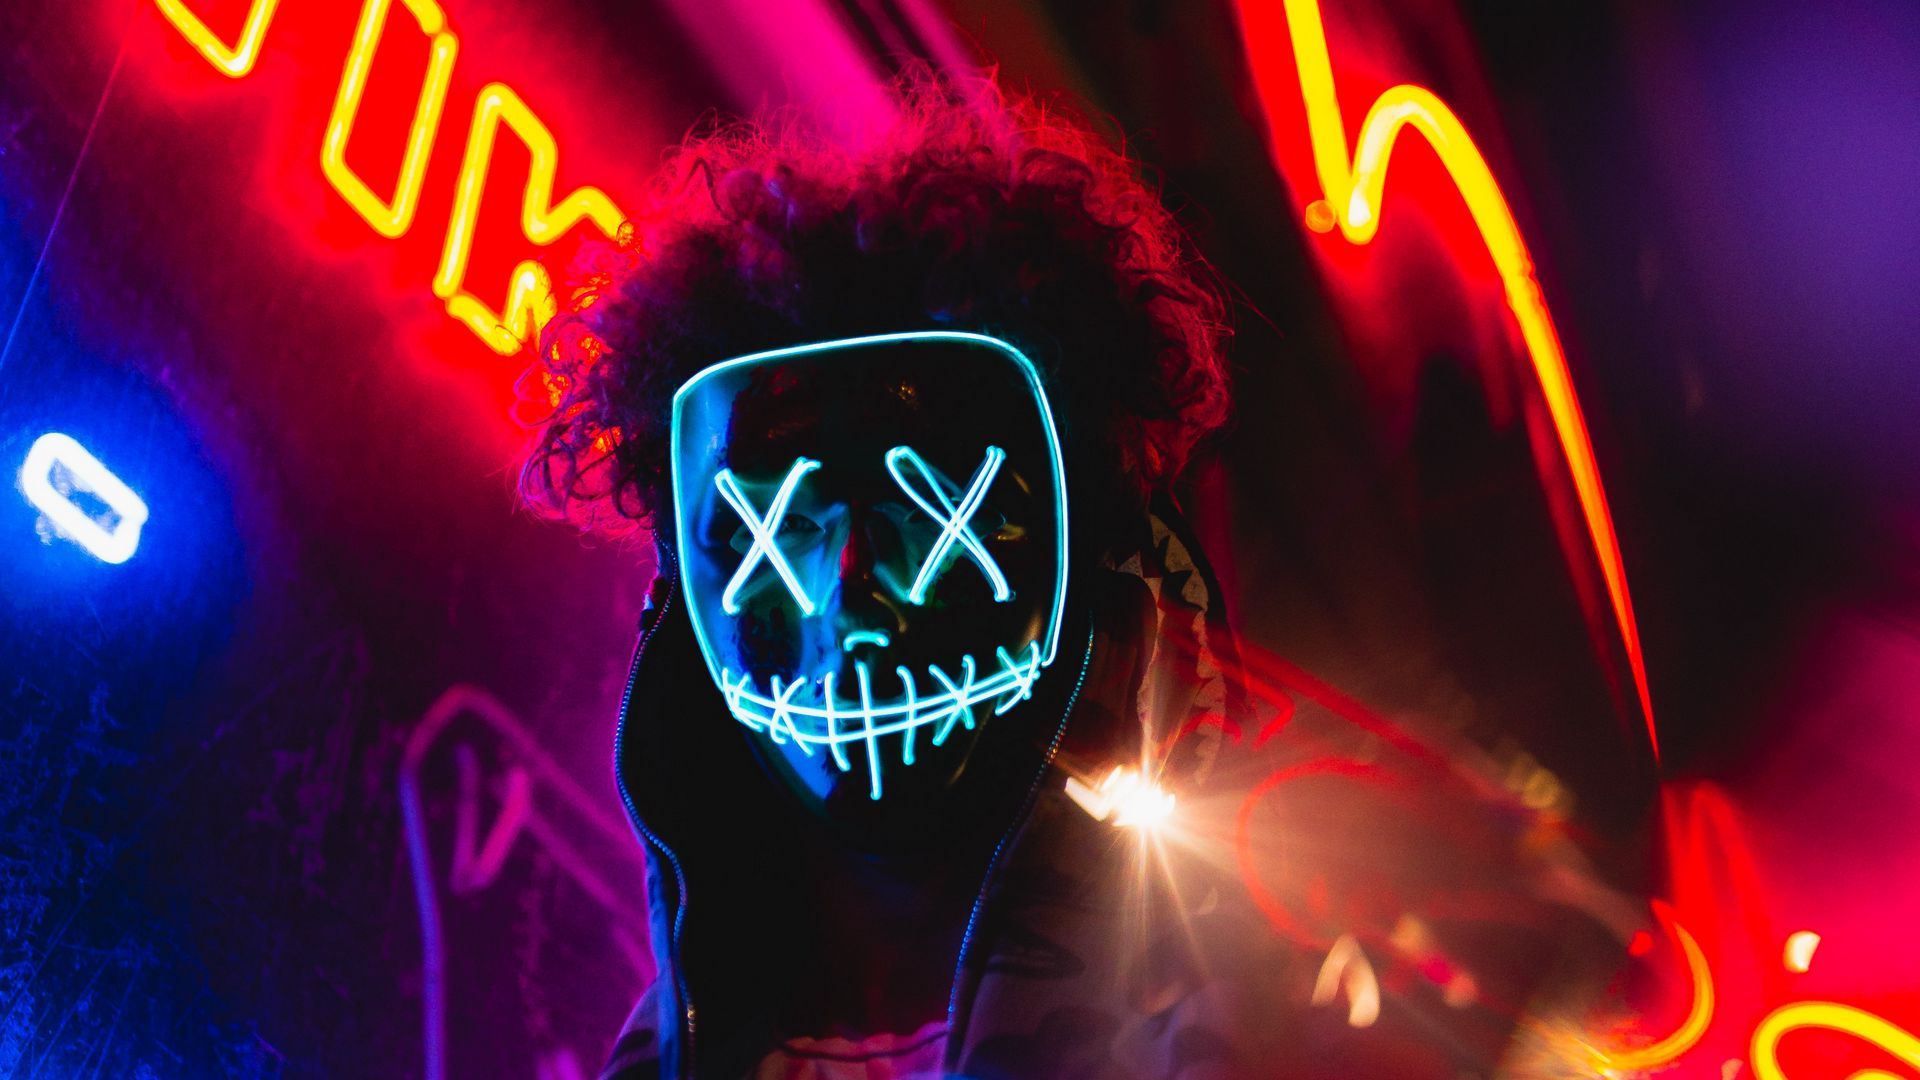 Download wallpaper 1920x1080 mask, neon, anonymous, light, man full hd, hdtv, fhd, 1080p HD background